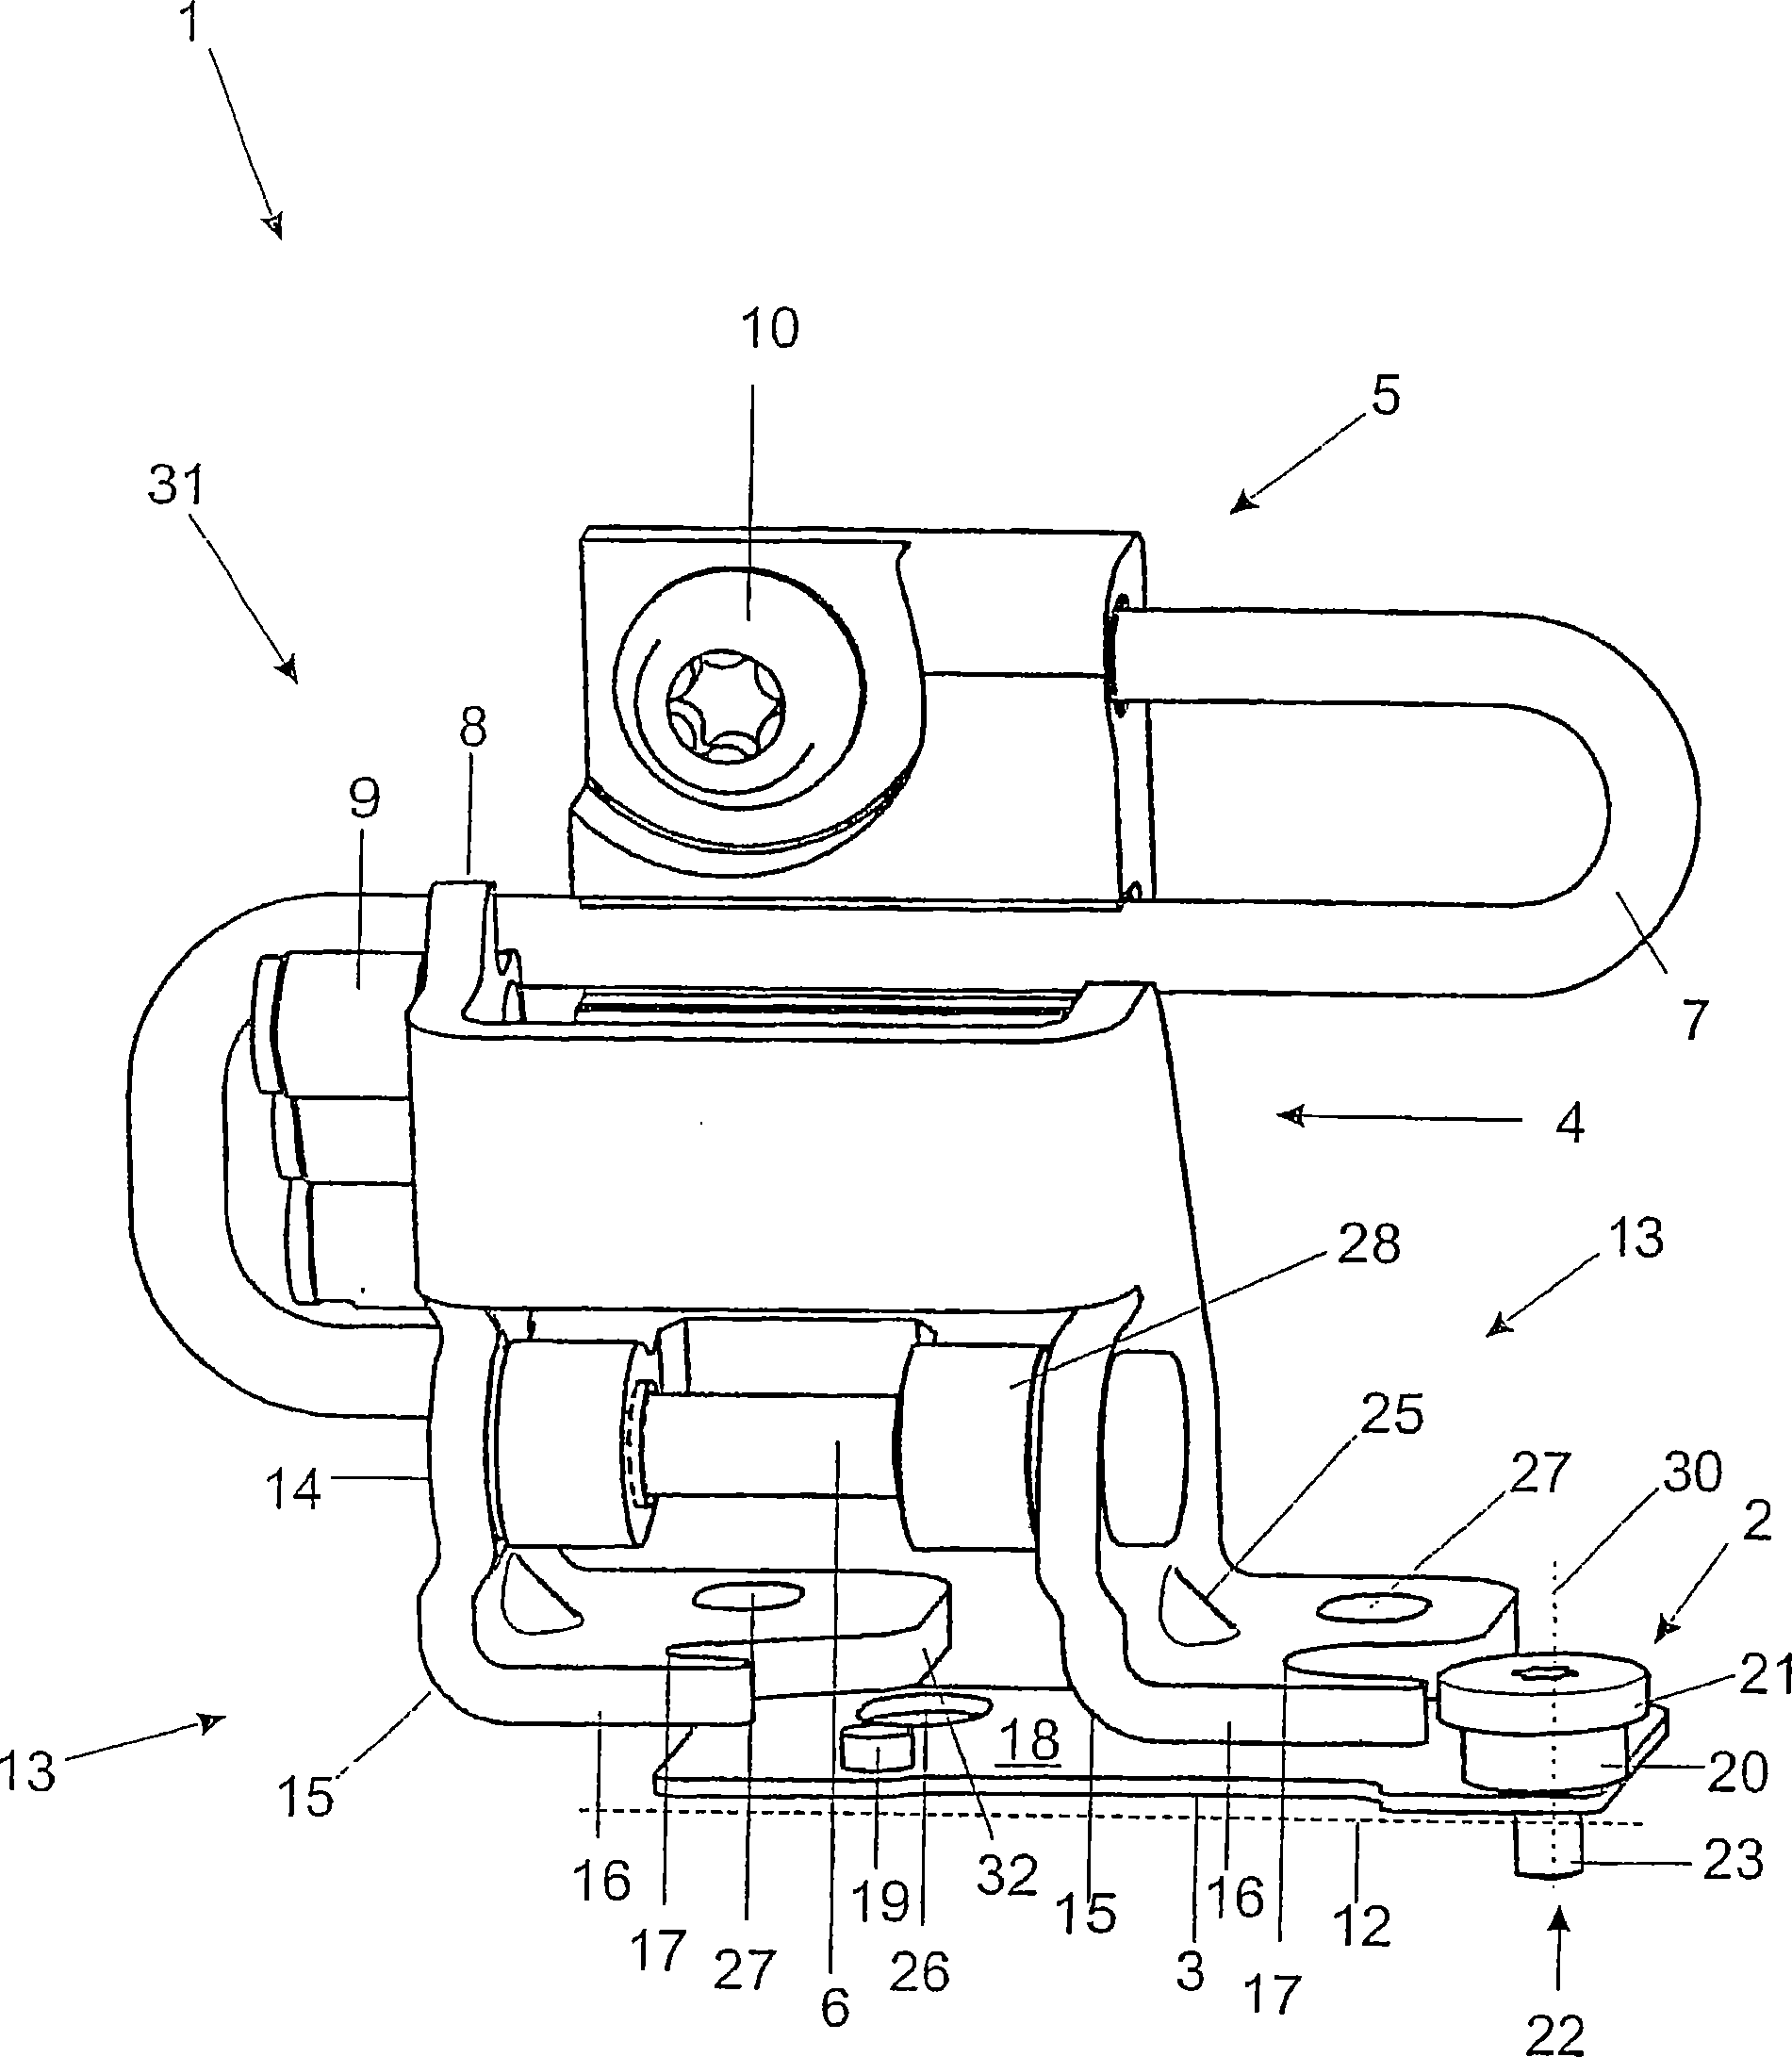 Assembly aid and method for positioning a hinge in a reproducible manner